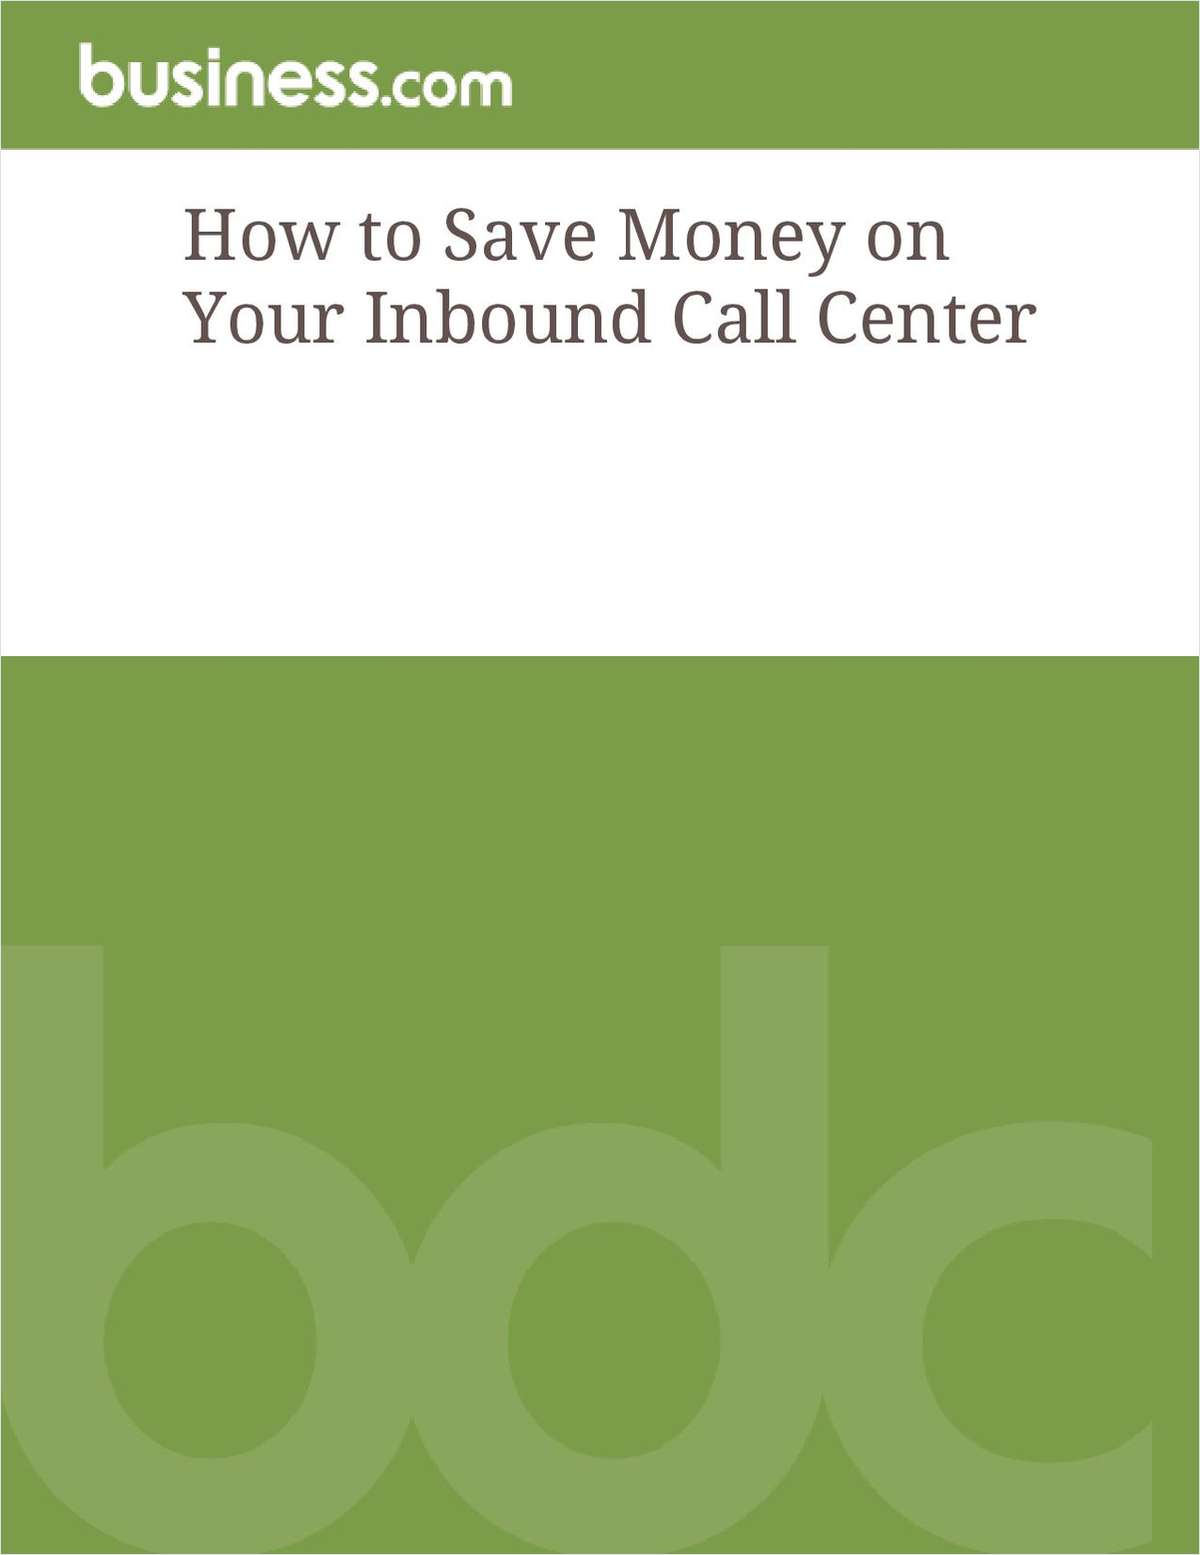 How to Save Money on Your Inbound Call Center